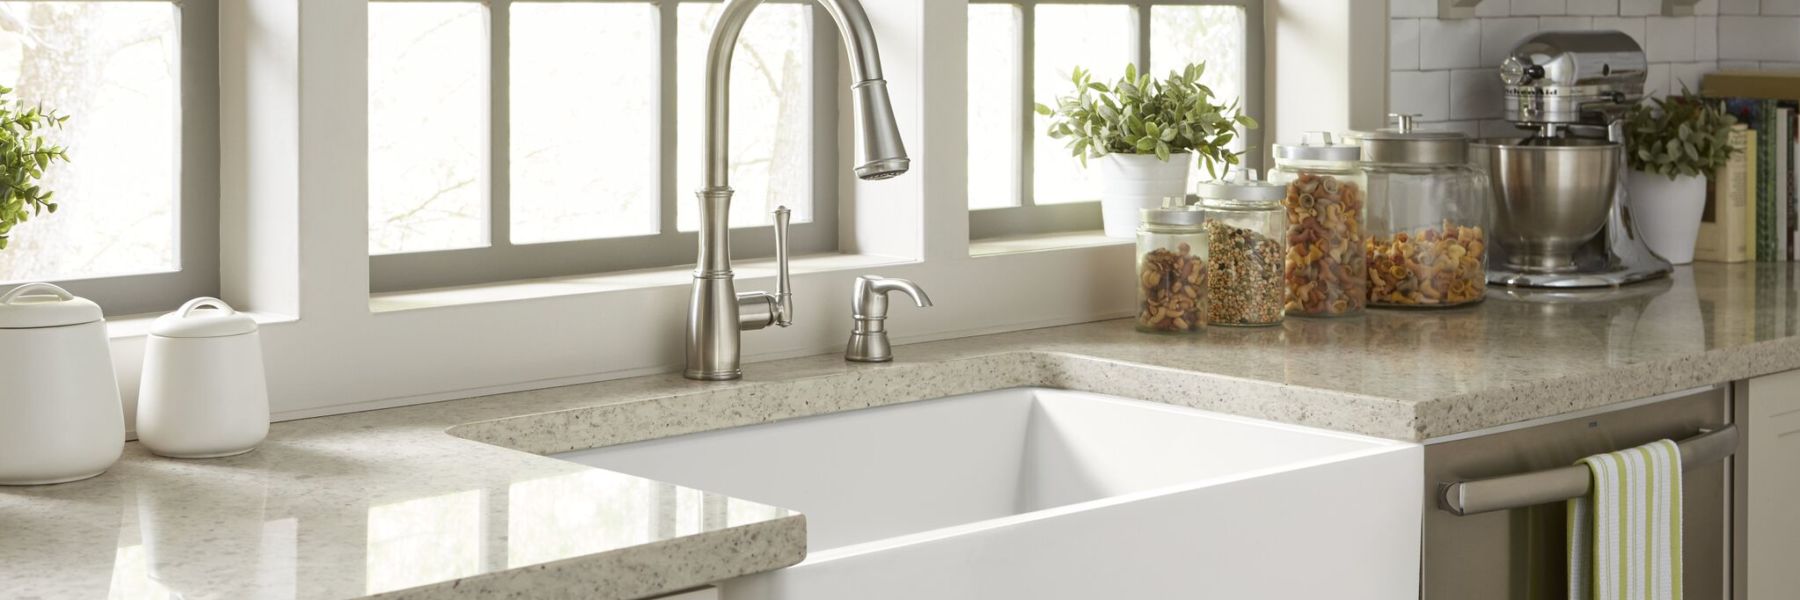 differences in kitchen sink materials